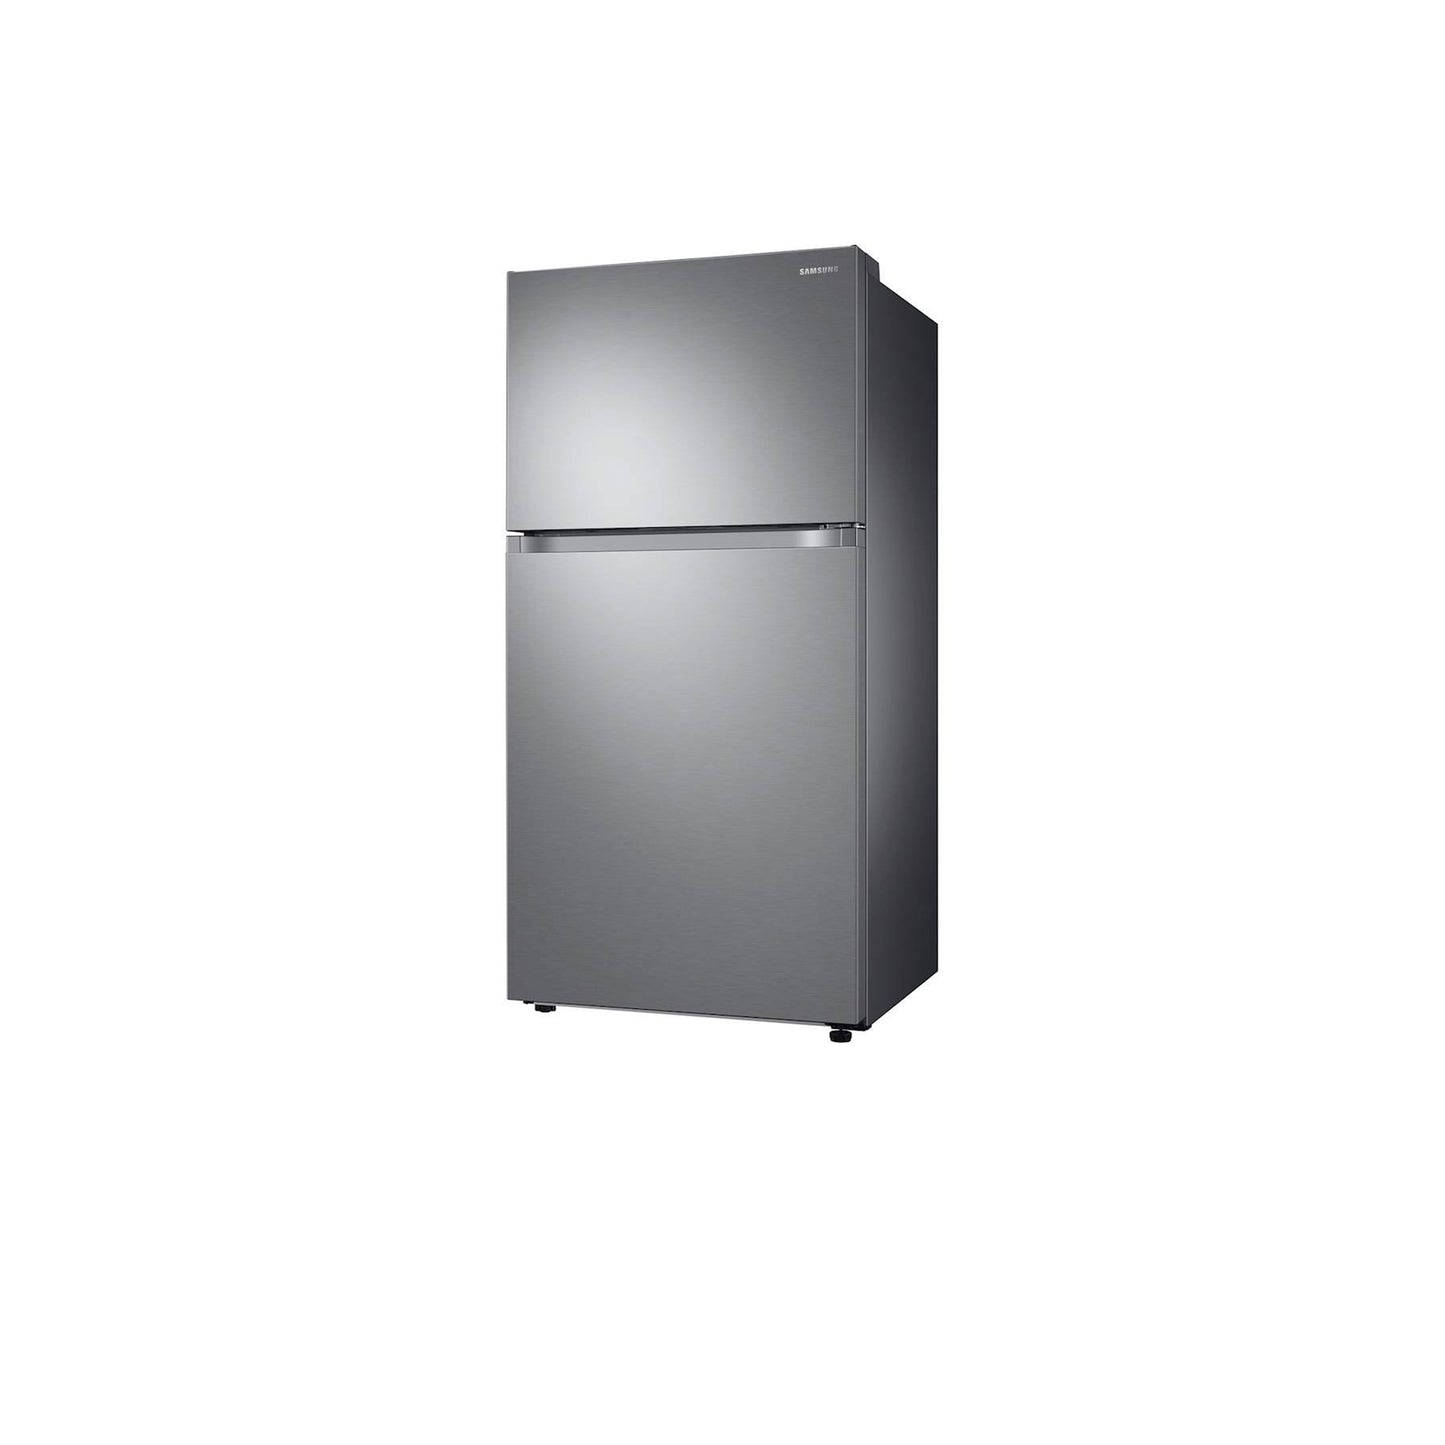 21 cu. ft. Top Freezer Refrigerator with FlexZone™ and Ice Maker in Stainless Steel